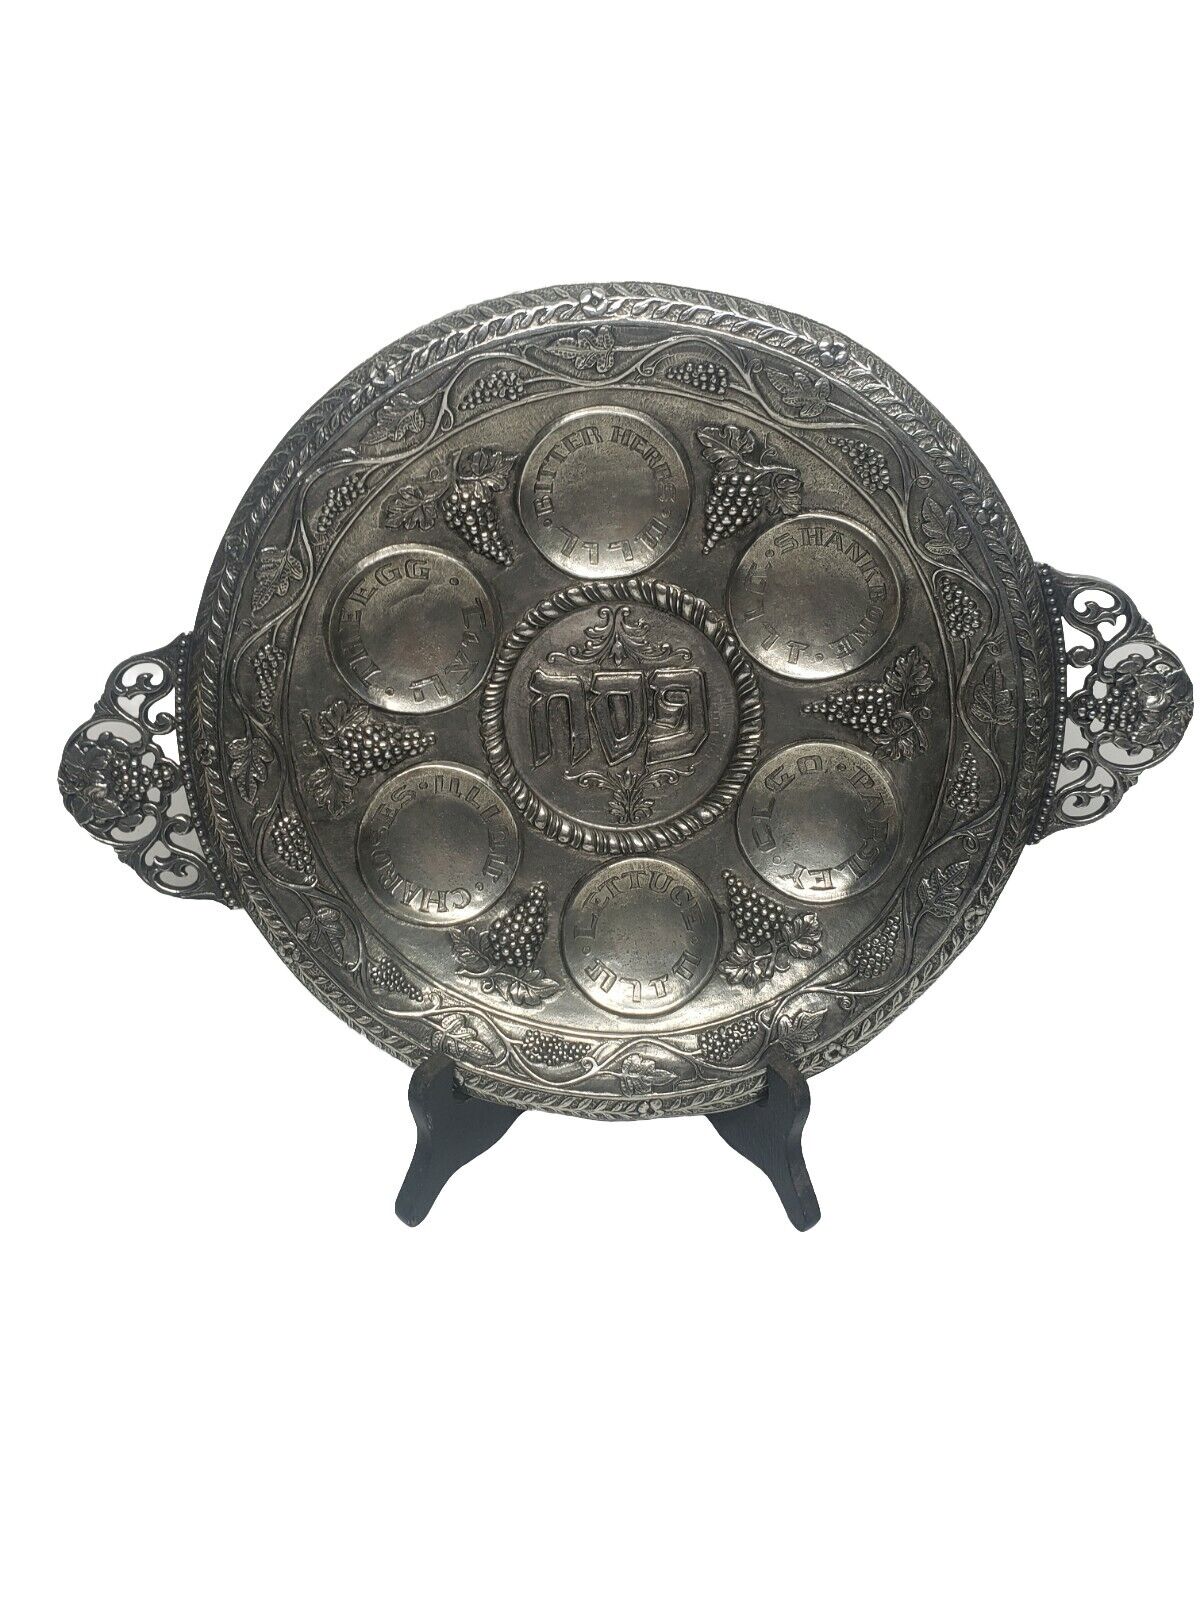 Judaica Handcrafted  Passover Pewter Seder Plate Made in Italy